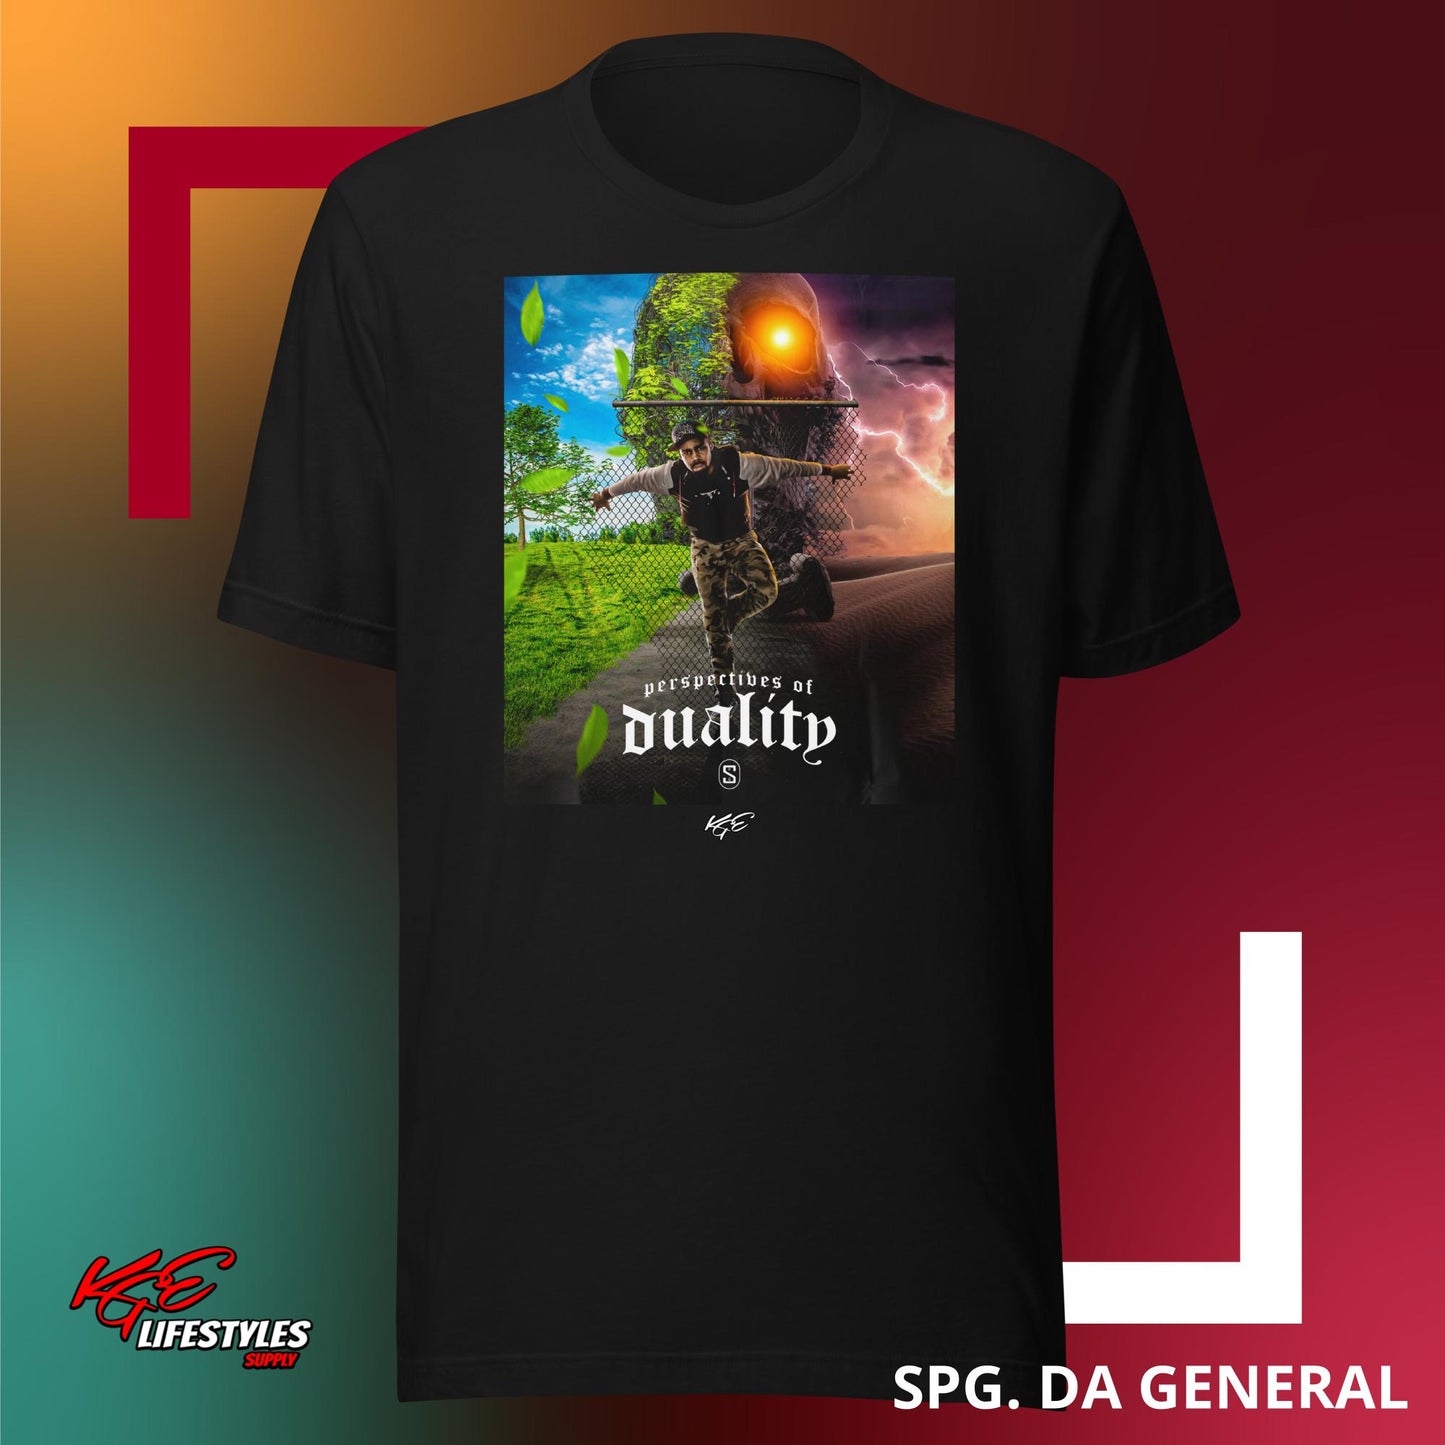 (New) SPG. DA GENERAL - Perspectibes of Duality 2023 - official support - premium tee